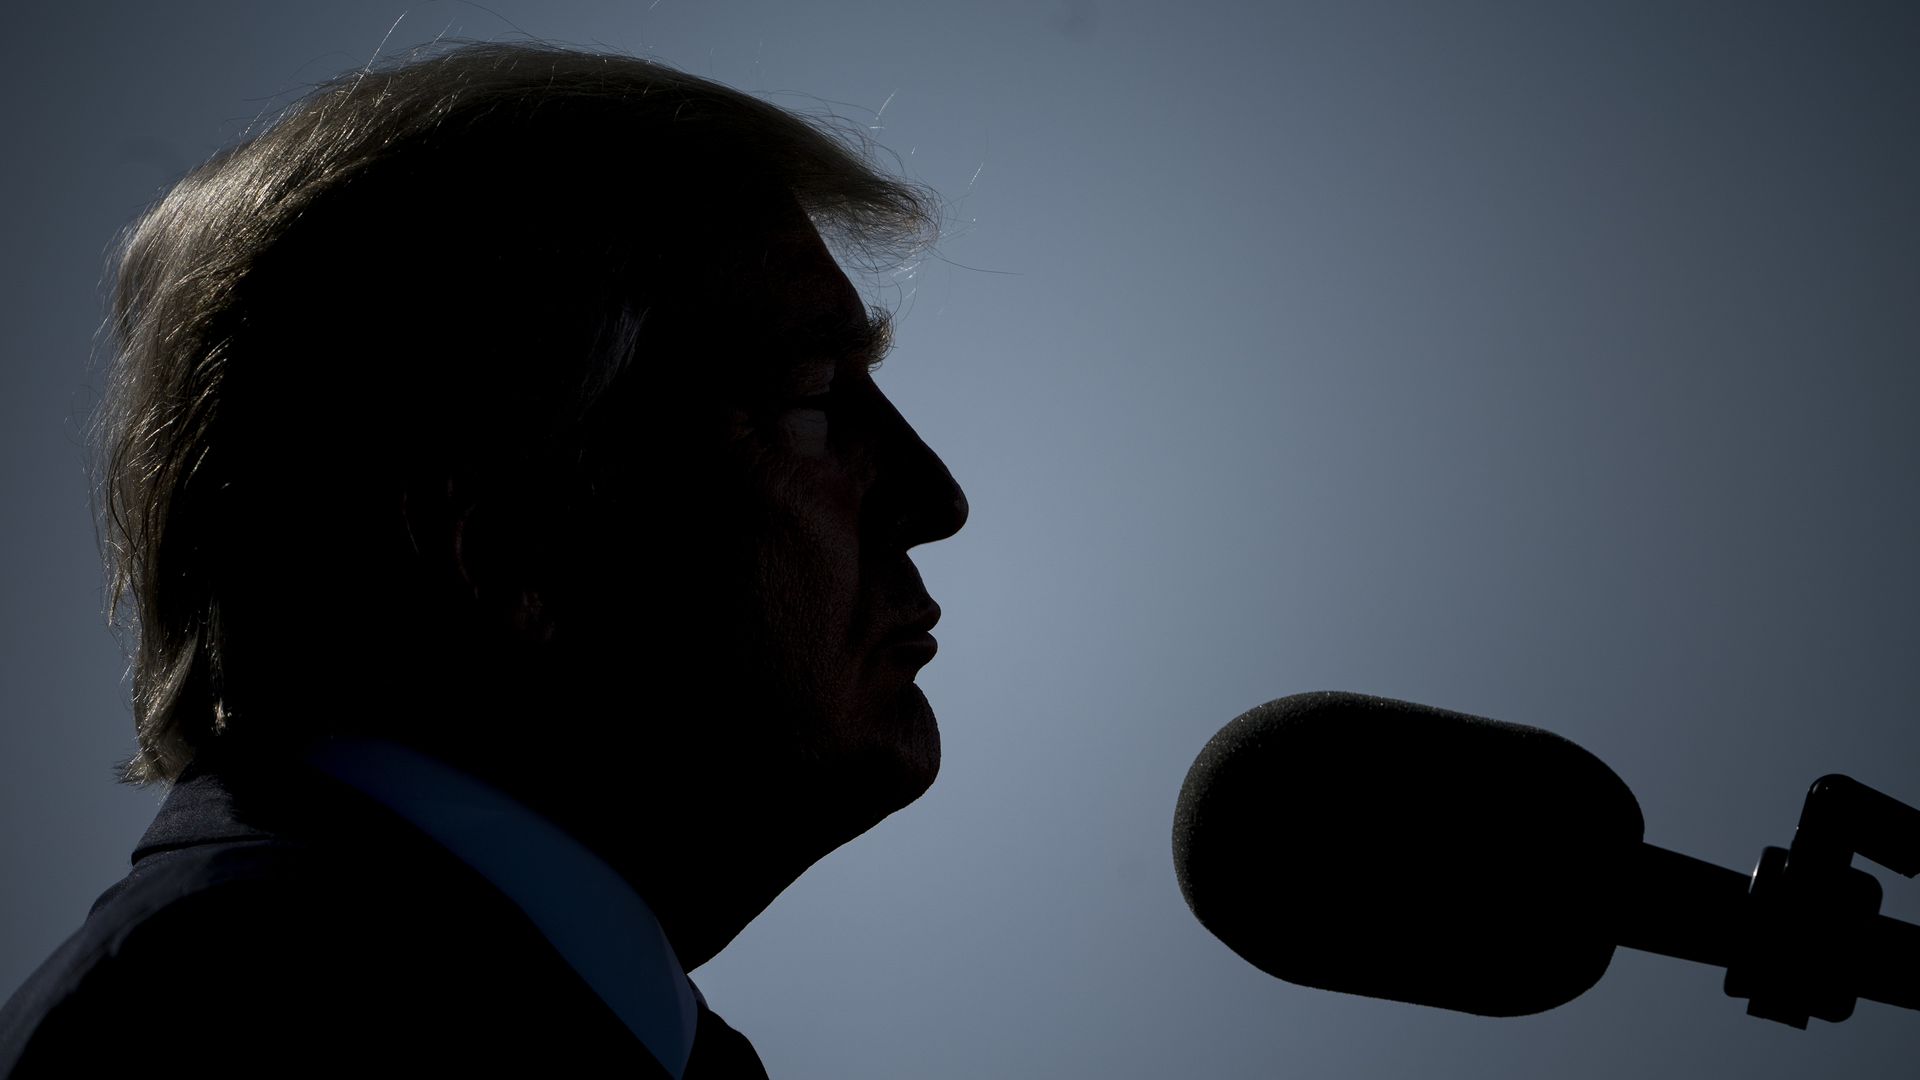 A silhouette profile image of President Donald Trump speaking into a microphone